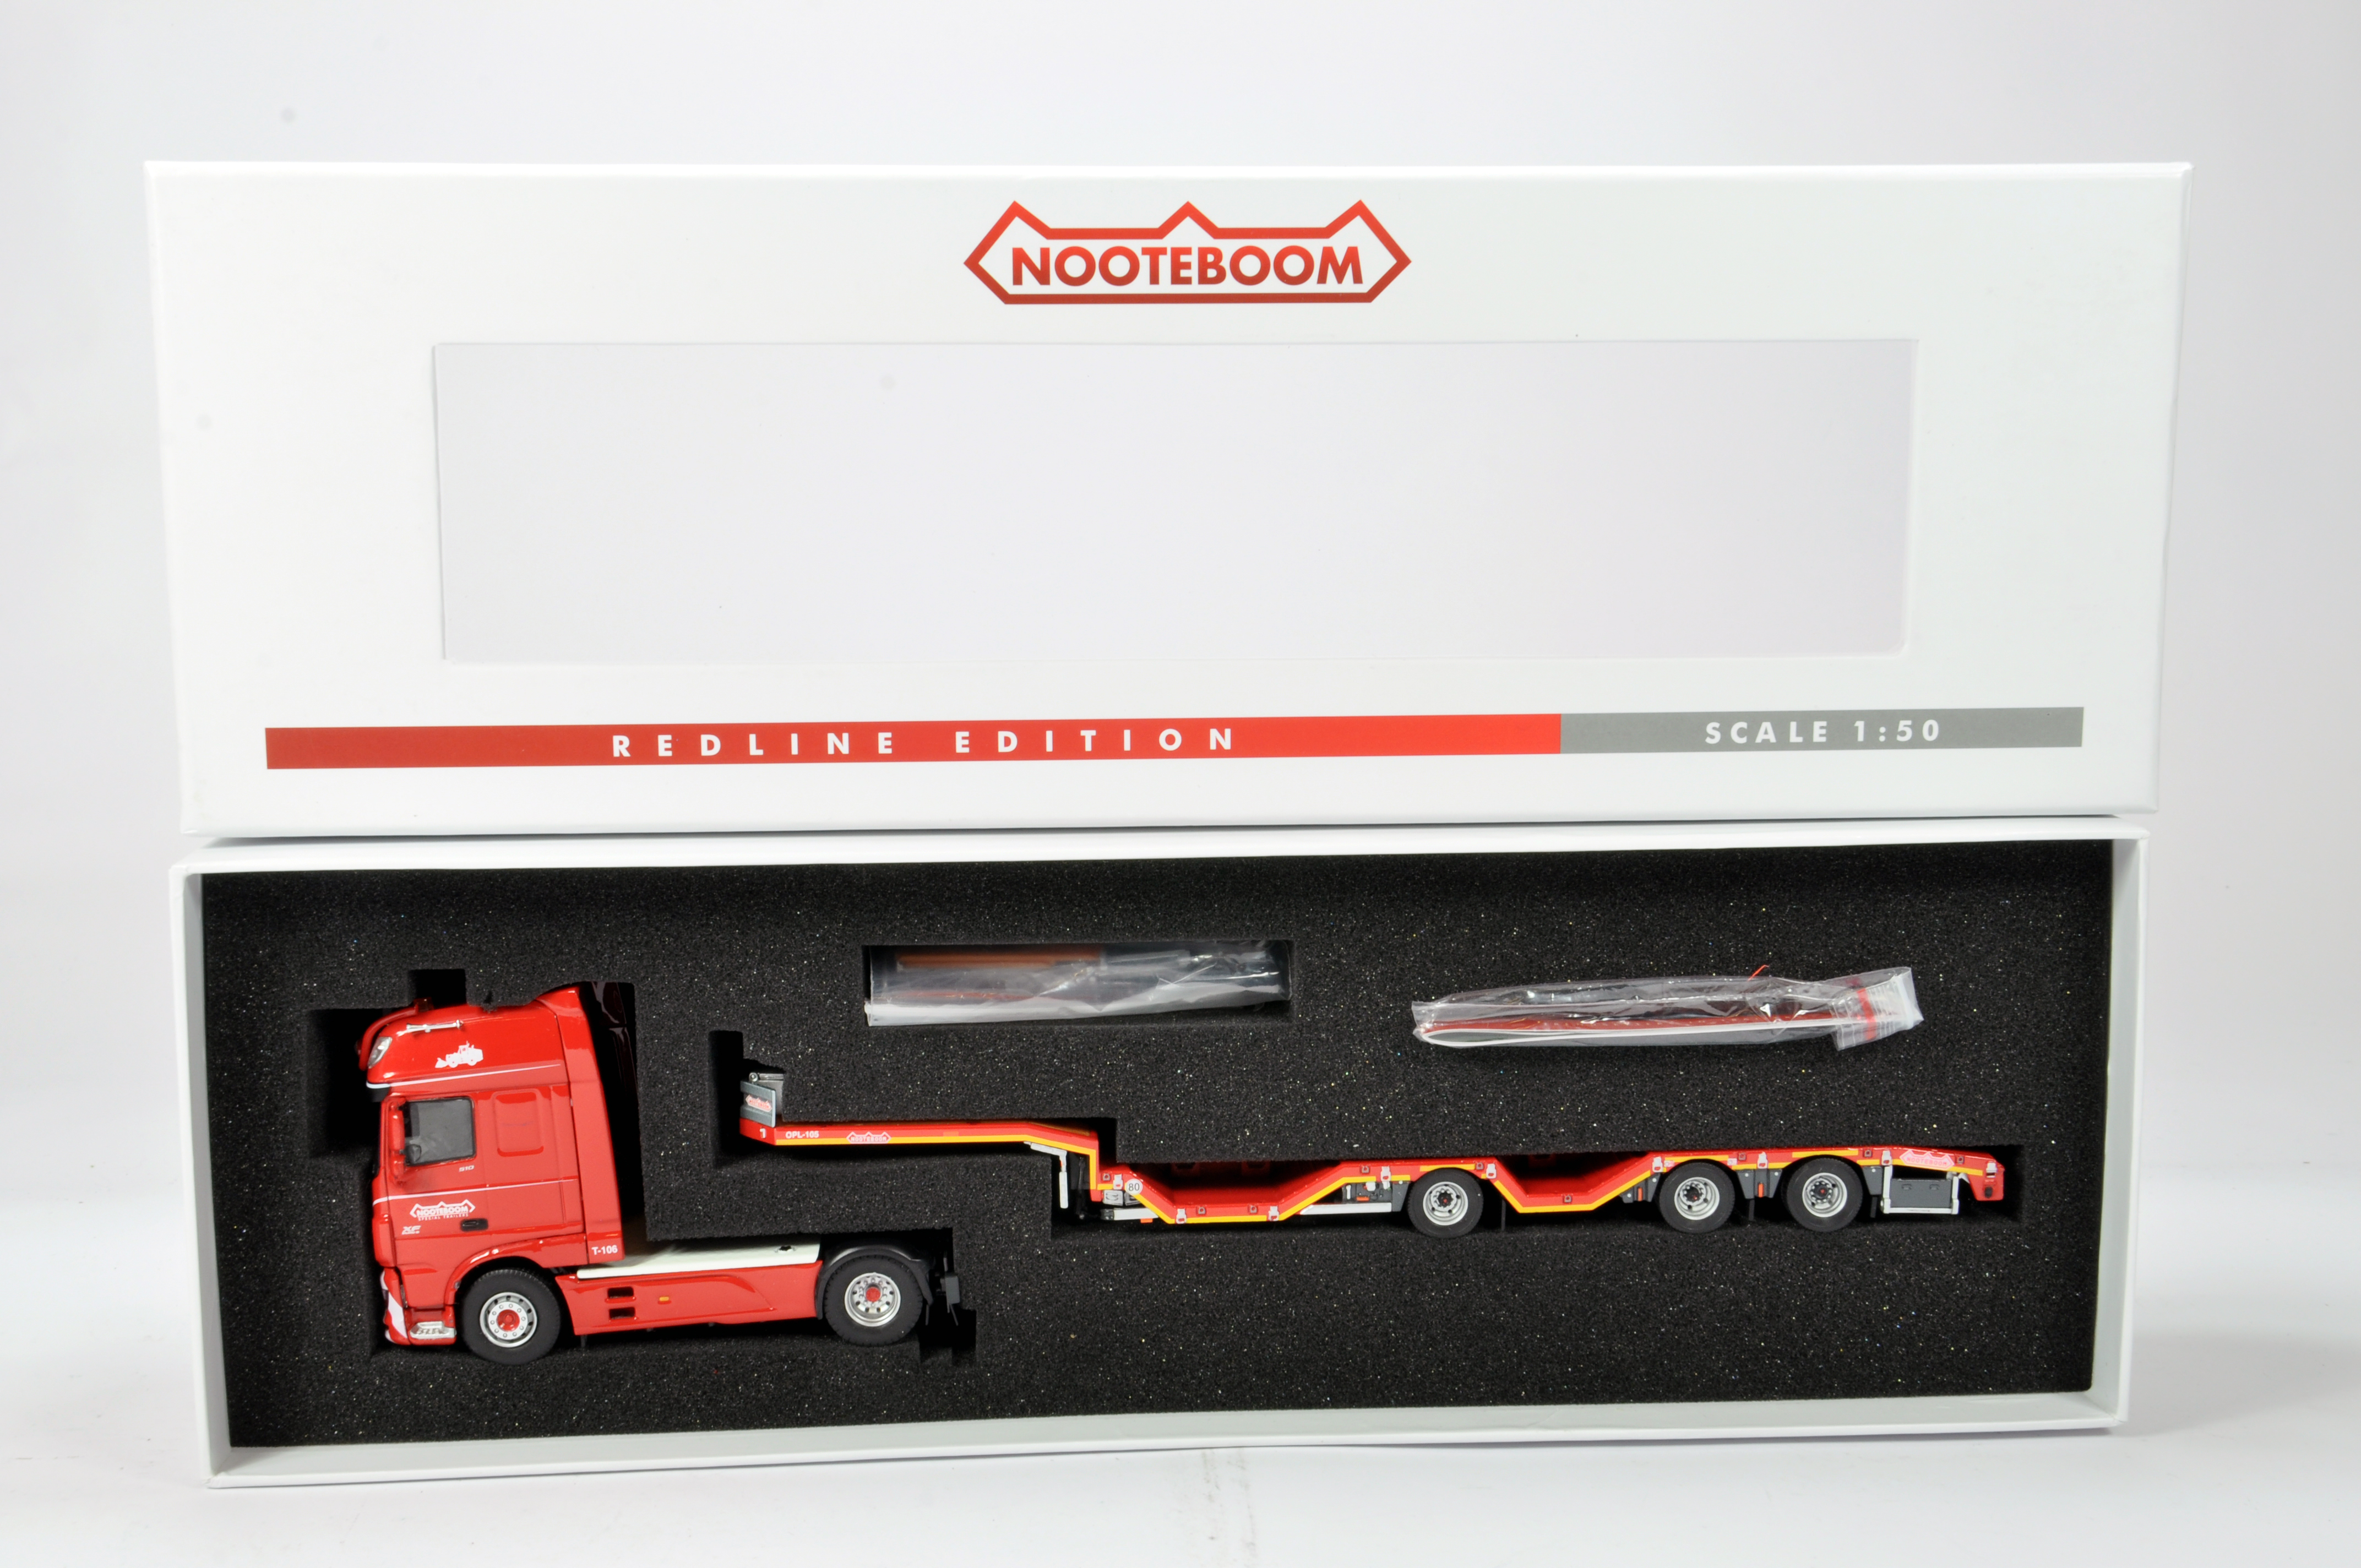 IMC 1/50 Commercial Precision Diecast Truck Issue No. 5322508 DAF SSC Euro 6 4X2 Nooteboom Low